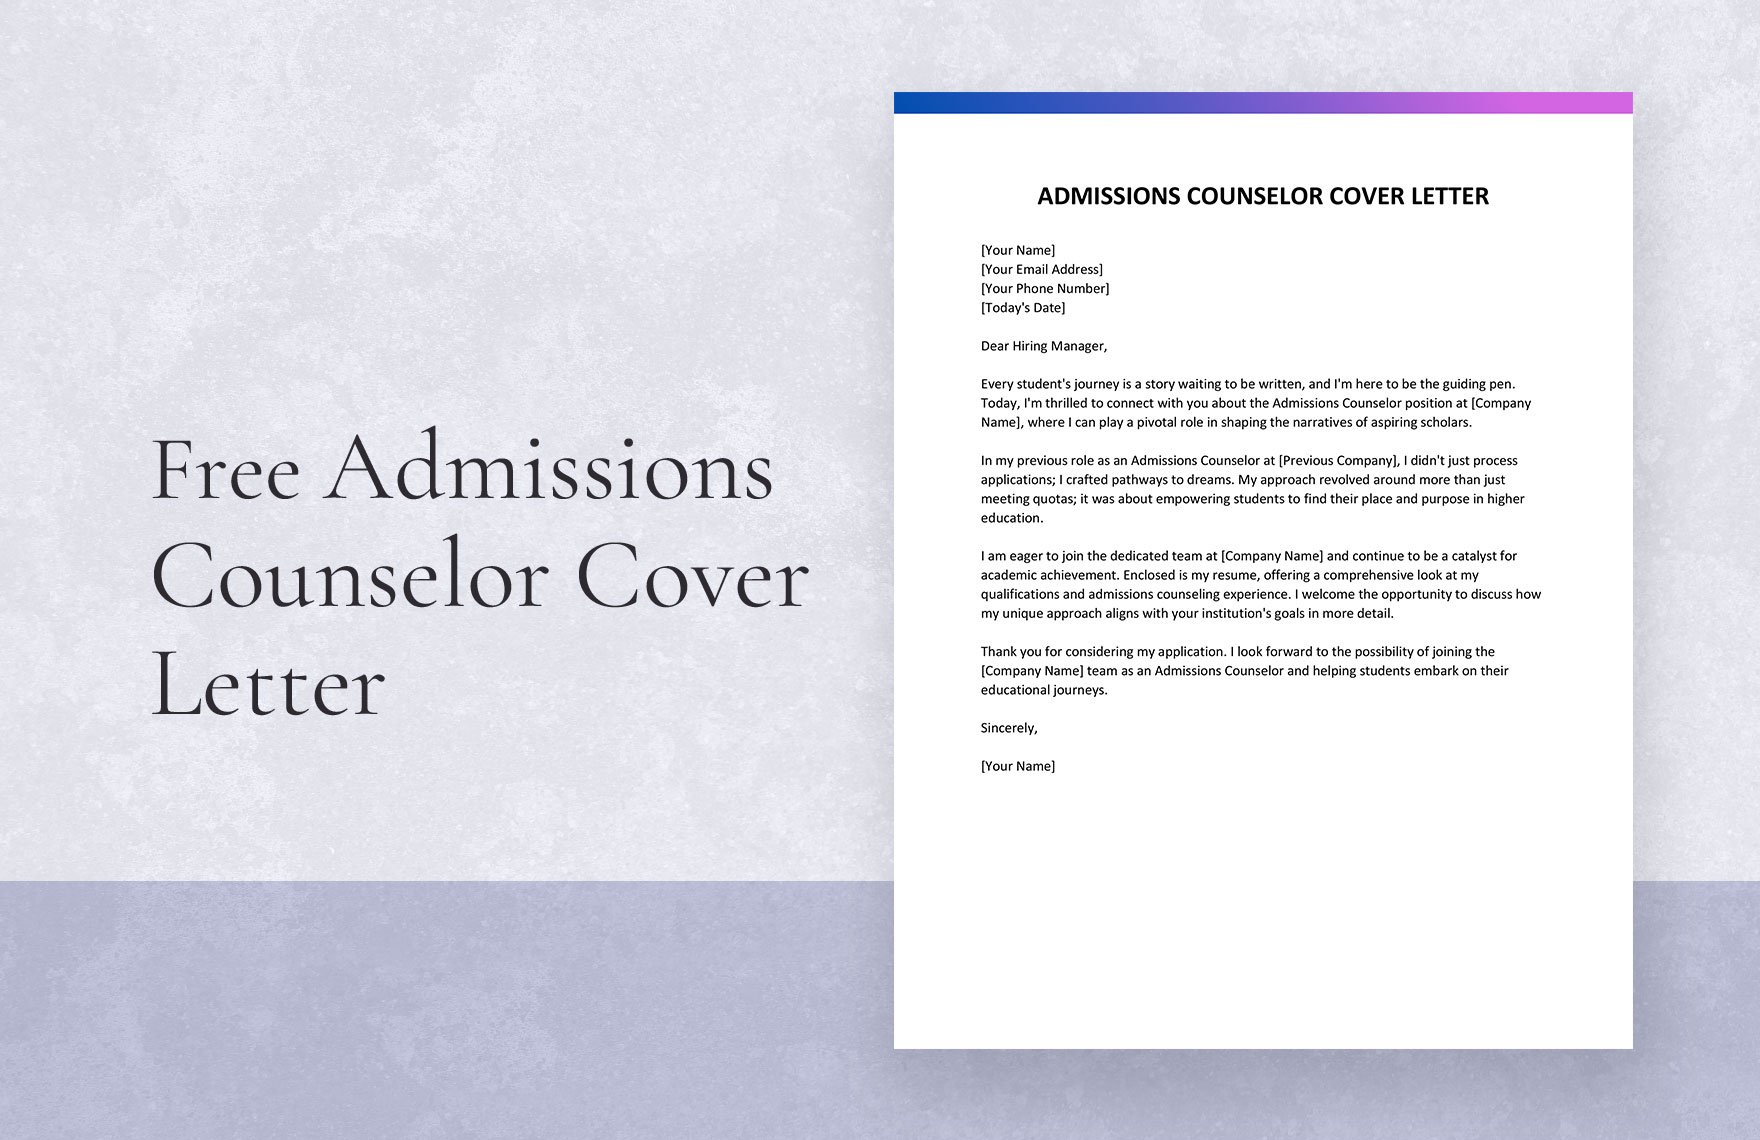 Admissions Counselor Cover Letter in Word, Google Docs